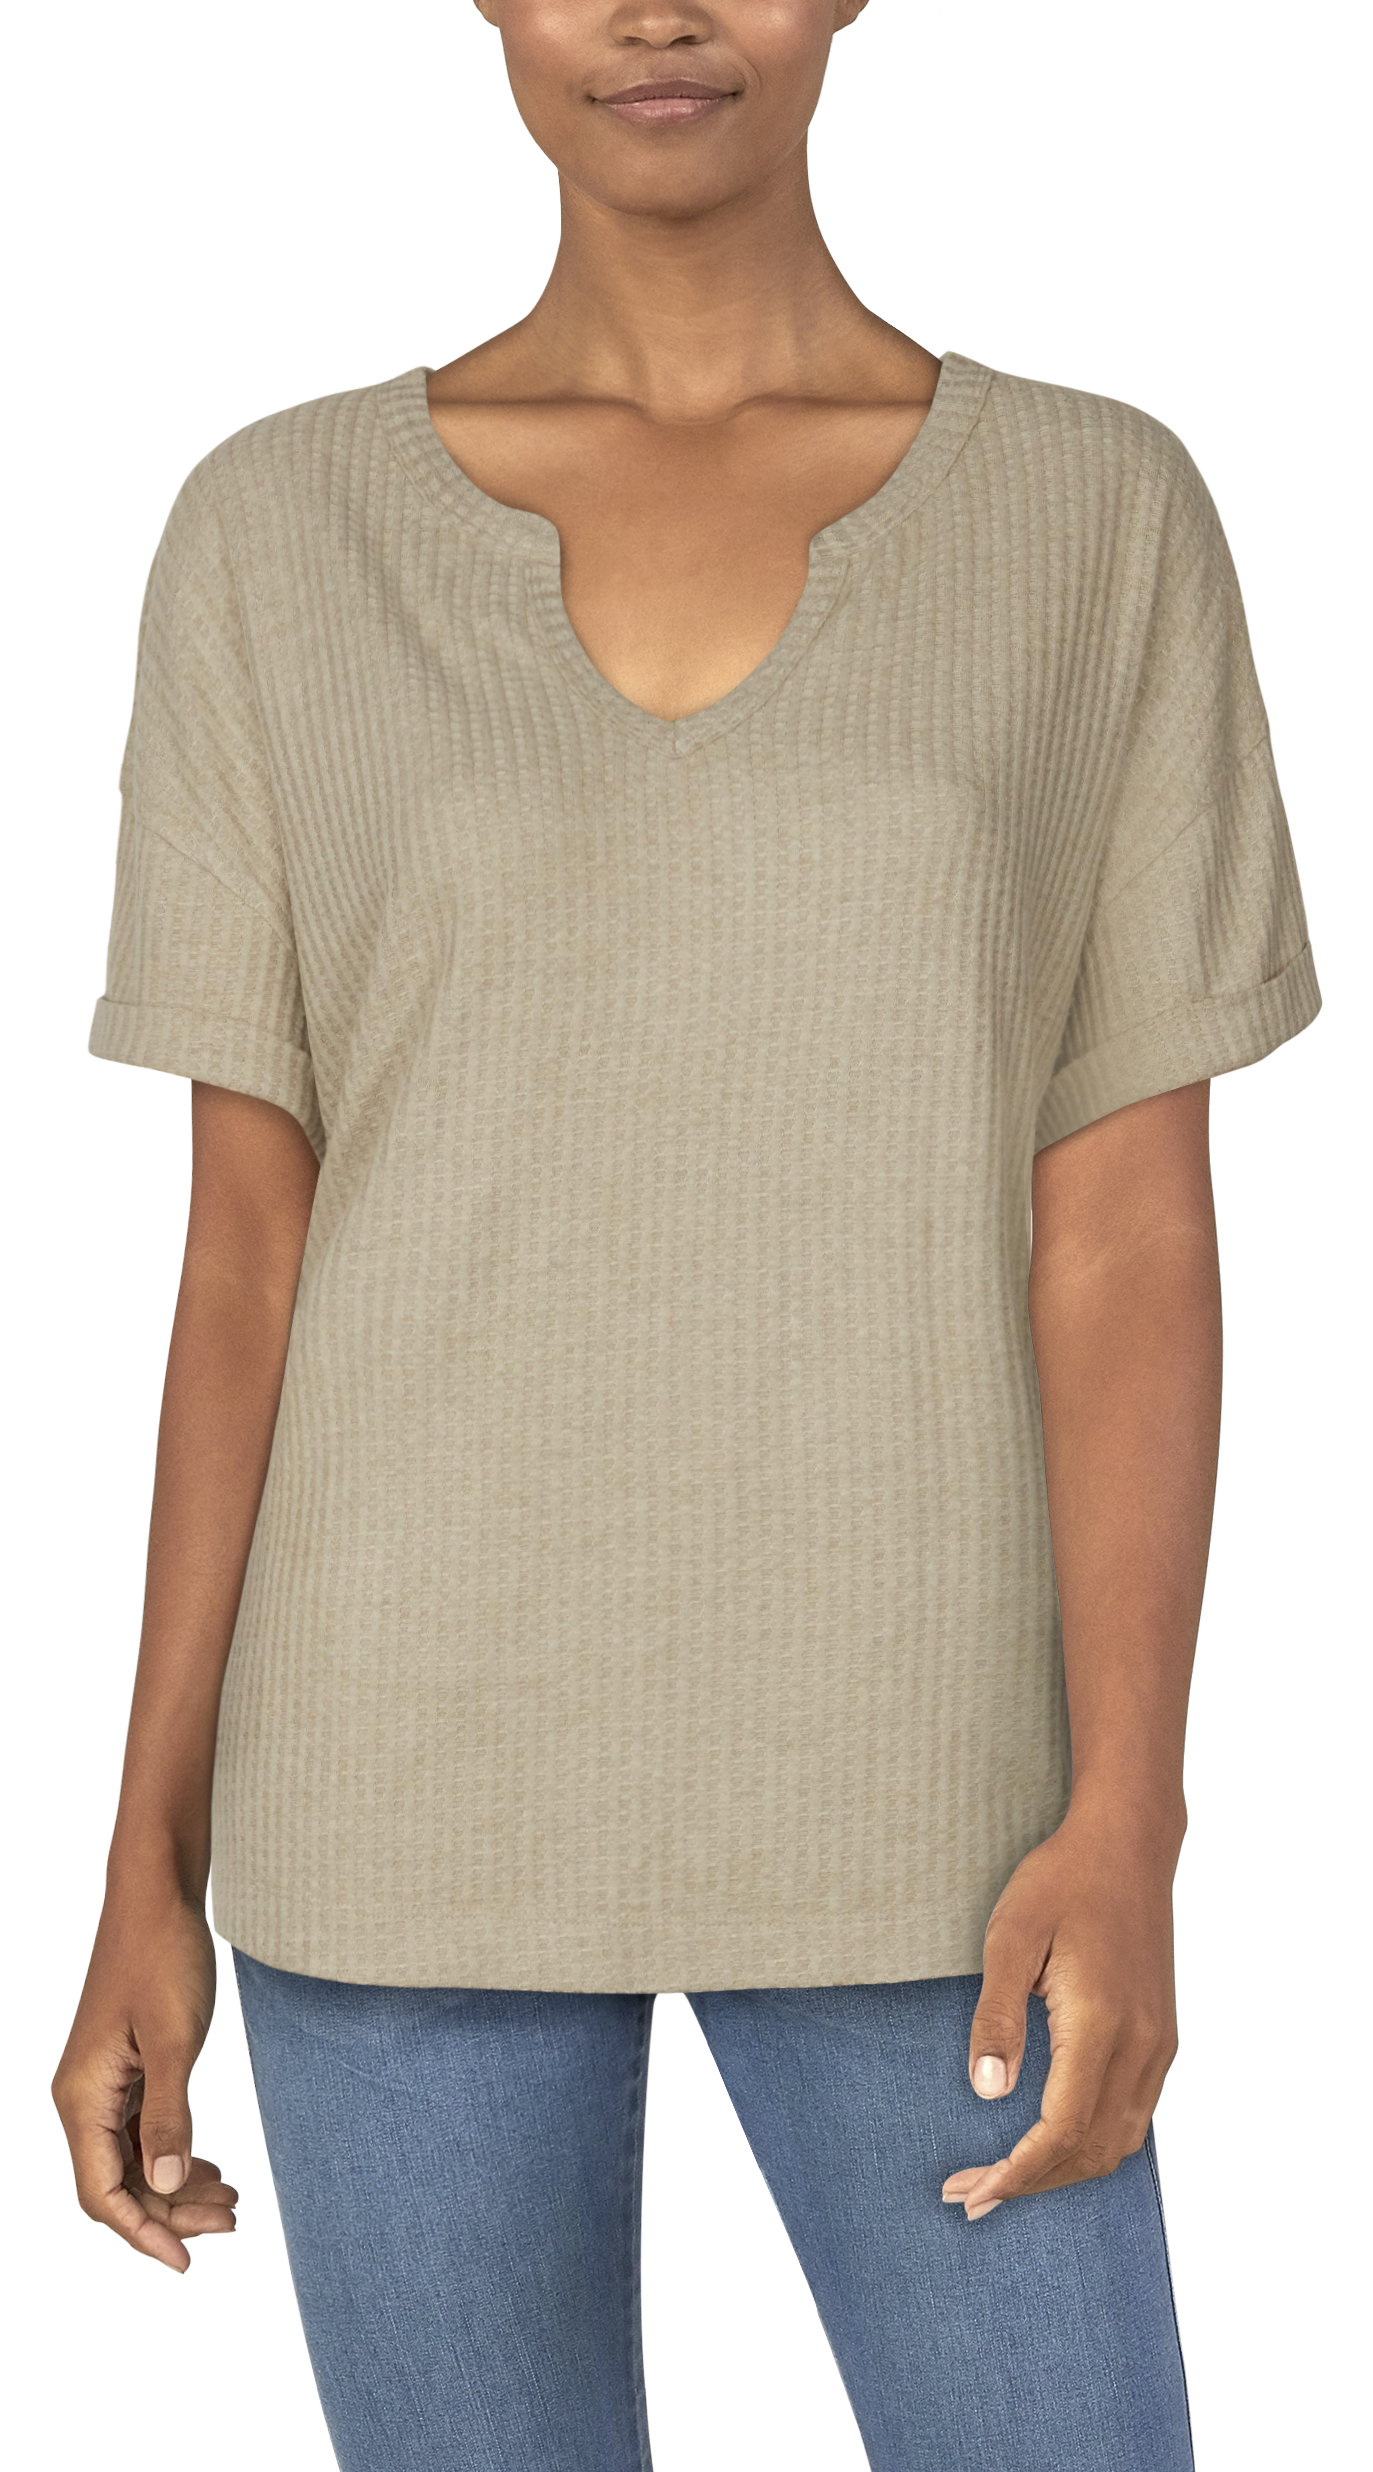 Natural Reflections Brush Creek Waffle Short-Sleeve Shirt for Ladies - Oatmeal Heather - XL